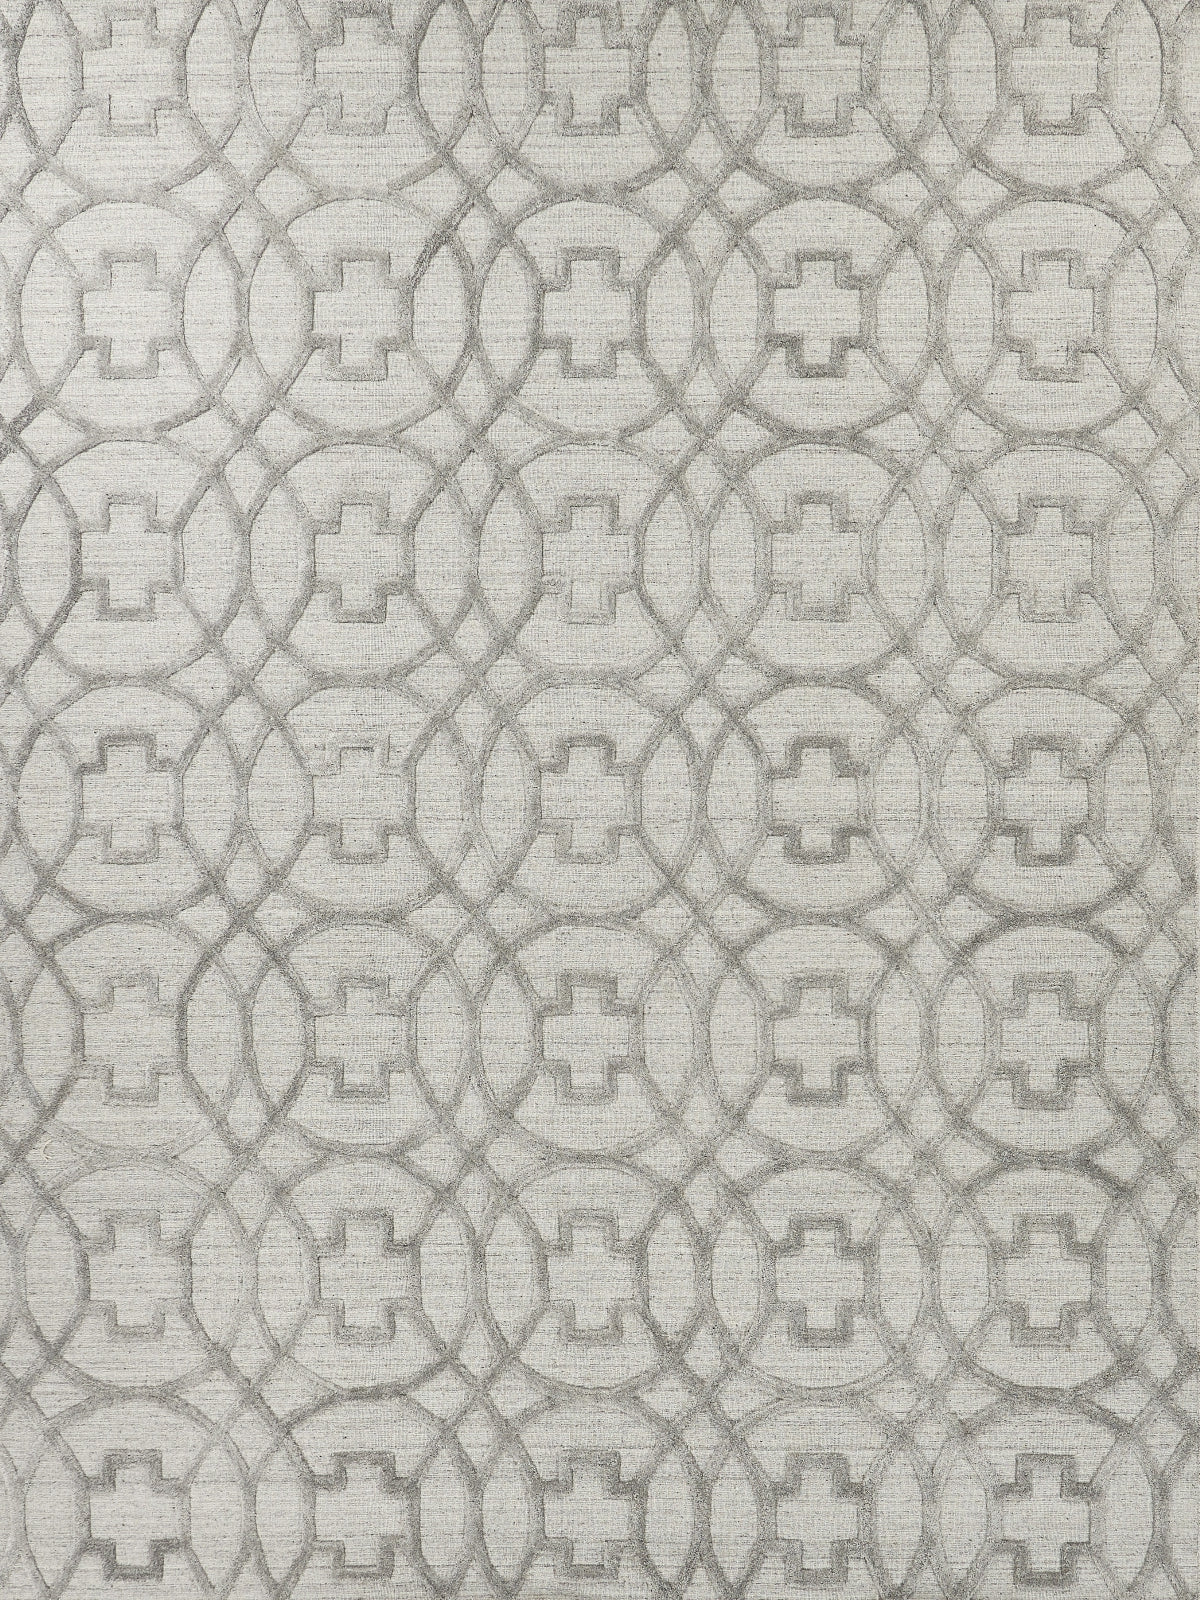 Exquisite Rugs Windsor 2448 Light Silver Area Rug